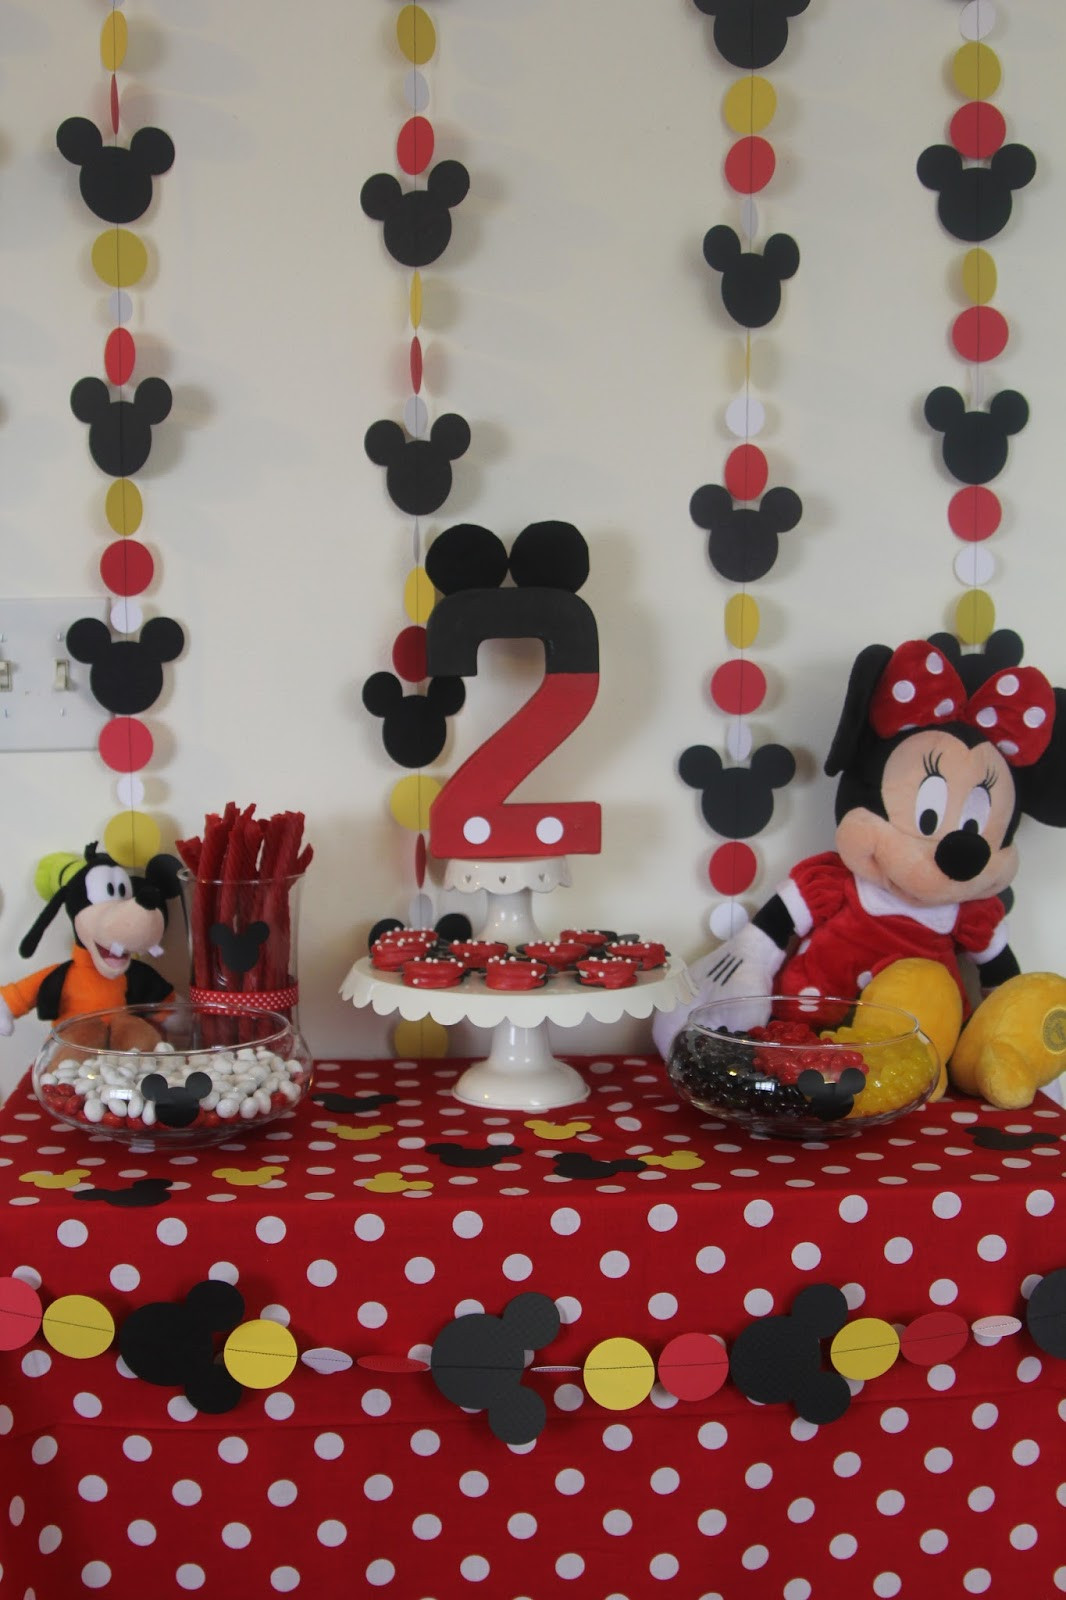 Minnie Mouse Birthday Party Decorations
 Decorating the Dorchester Way Simple Red Minnie Mouse